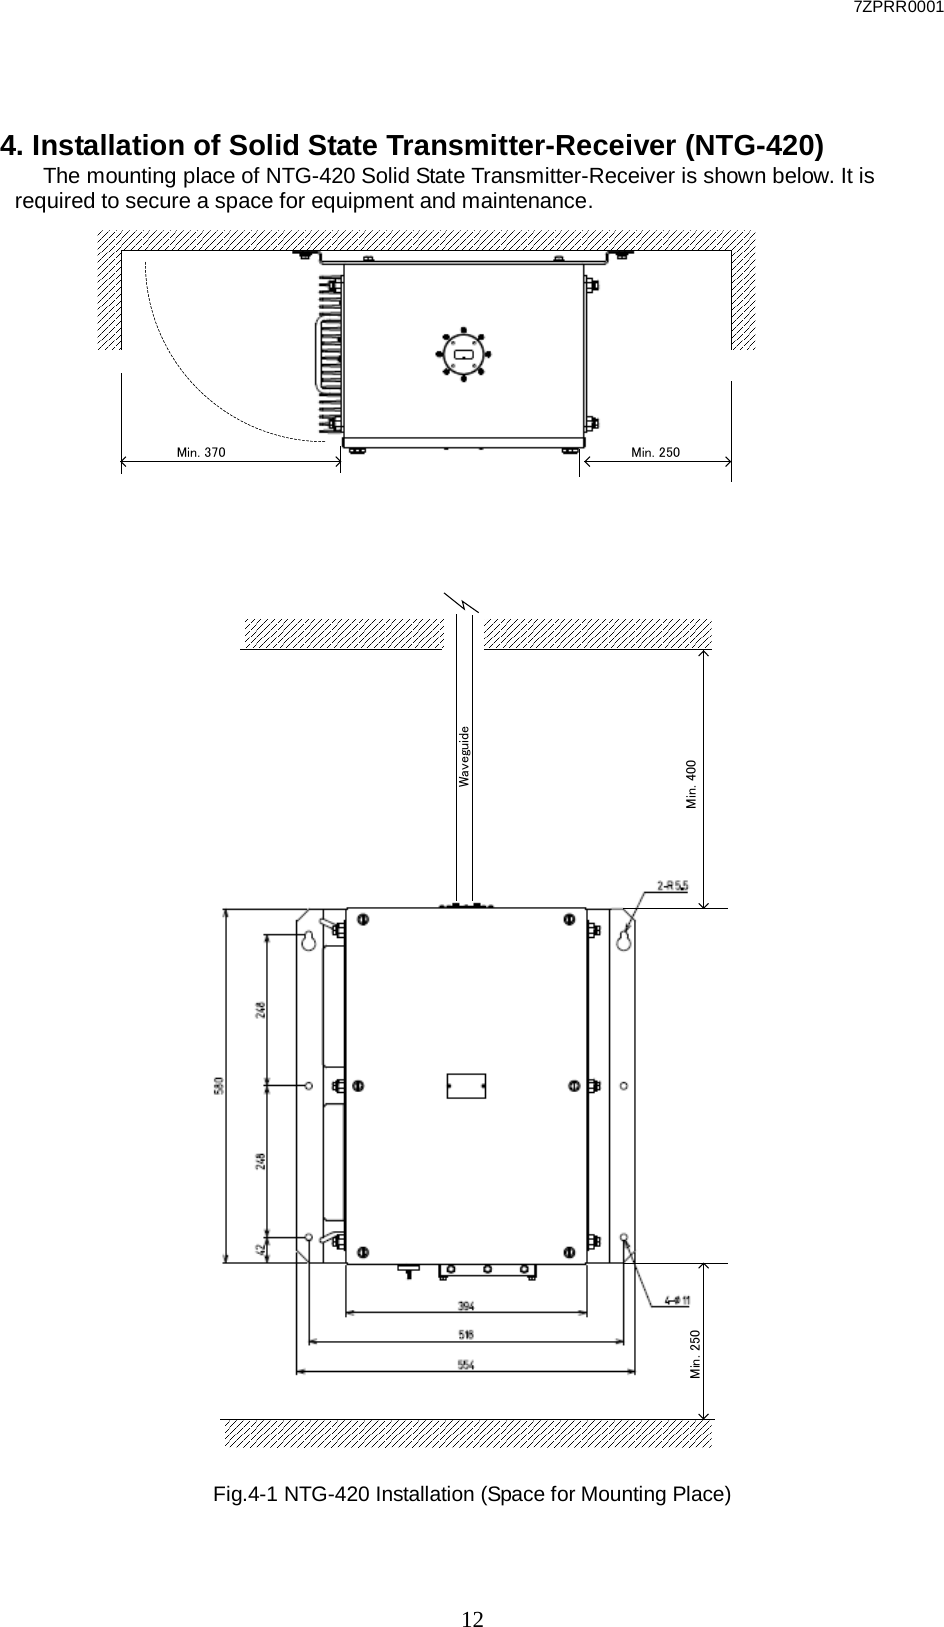 7ZPRR0001  12 4. Installation of Solid State Transmitter-Receiver (NTG-420) The mounting place of NTG-420 Solid State Transmitter-Receiver is shown below. It is required to secure a space for equipment and maintenance.                                                      Fig.4-1 NTG-420 Installation (Space for Mounting Place) Min. 250WaveguideMin. 400Min. 250Min. 370